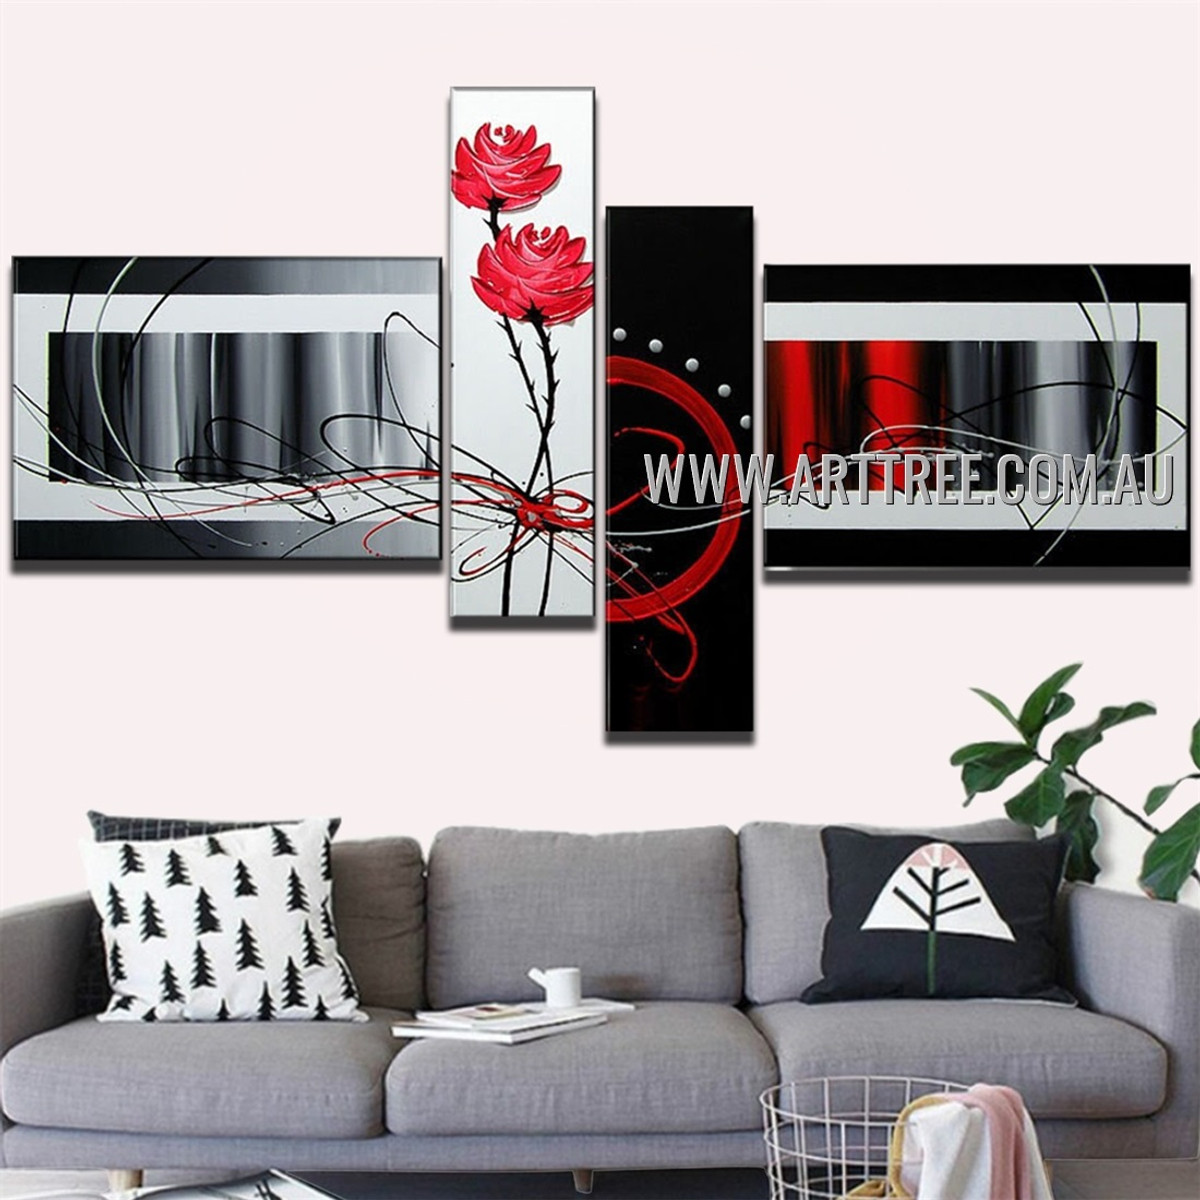 Red Rose & Streaks Abstract Handmade 4 Piece Multi Panel Painting For Room Drape